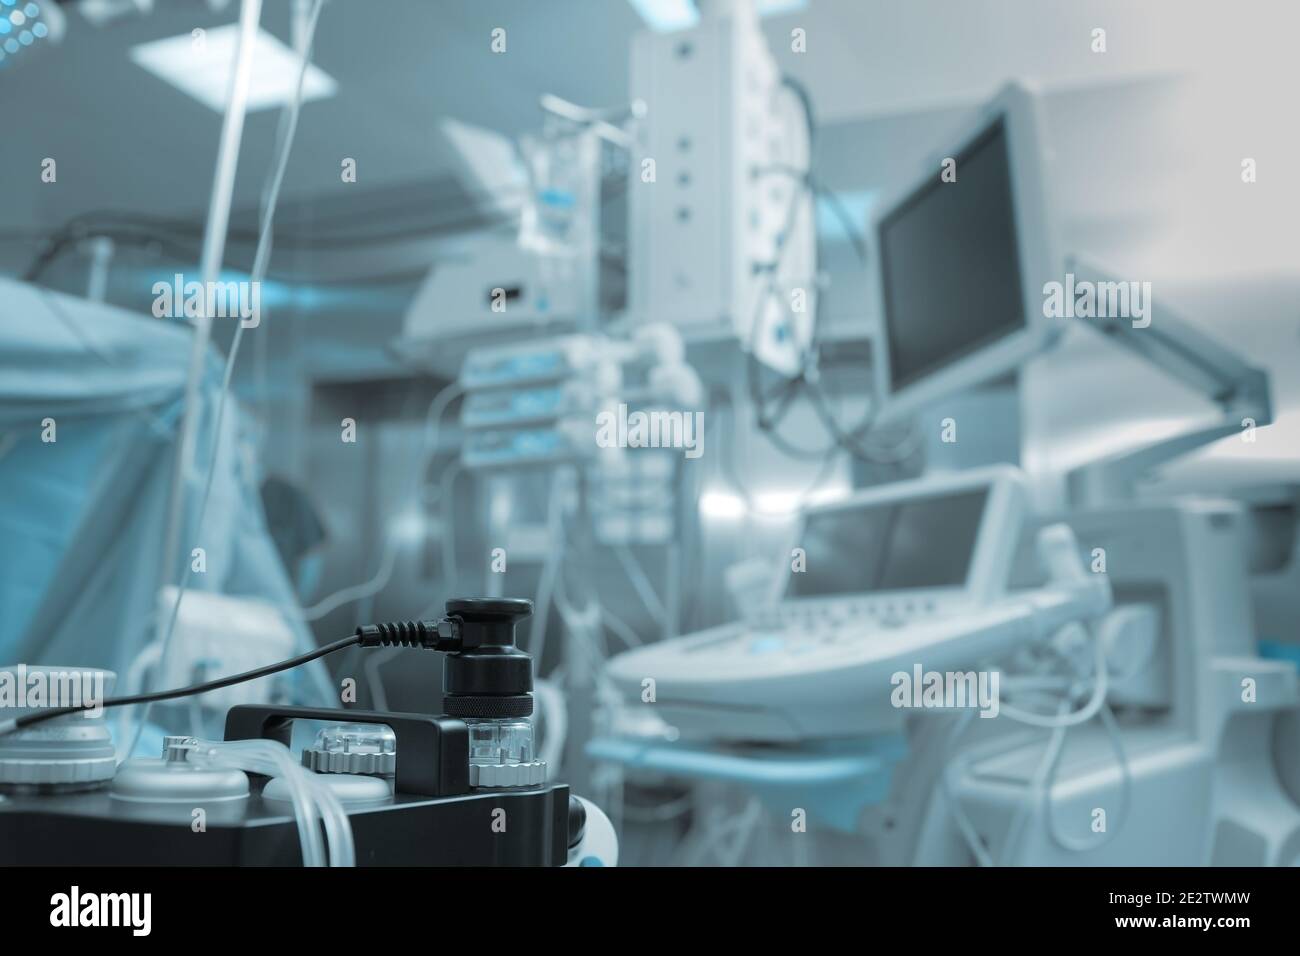 Breathing apparatus for anesthesia in the operating room with multiple devices Stock Photo